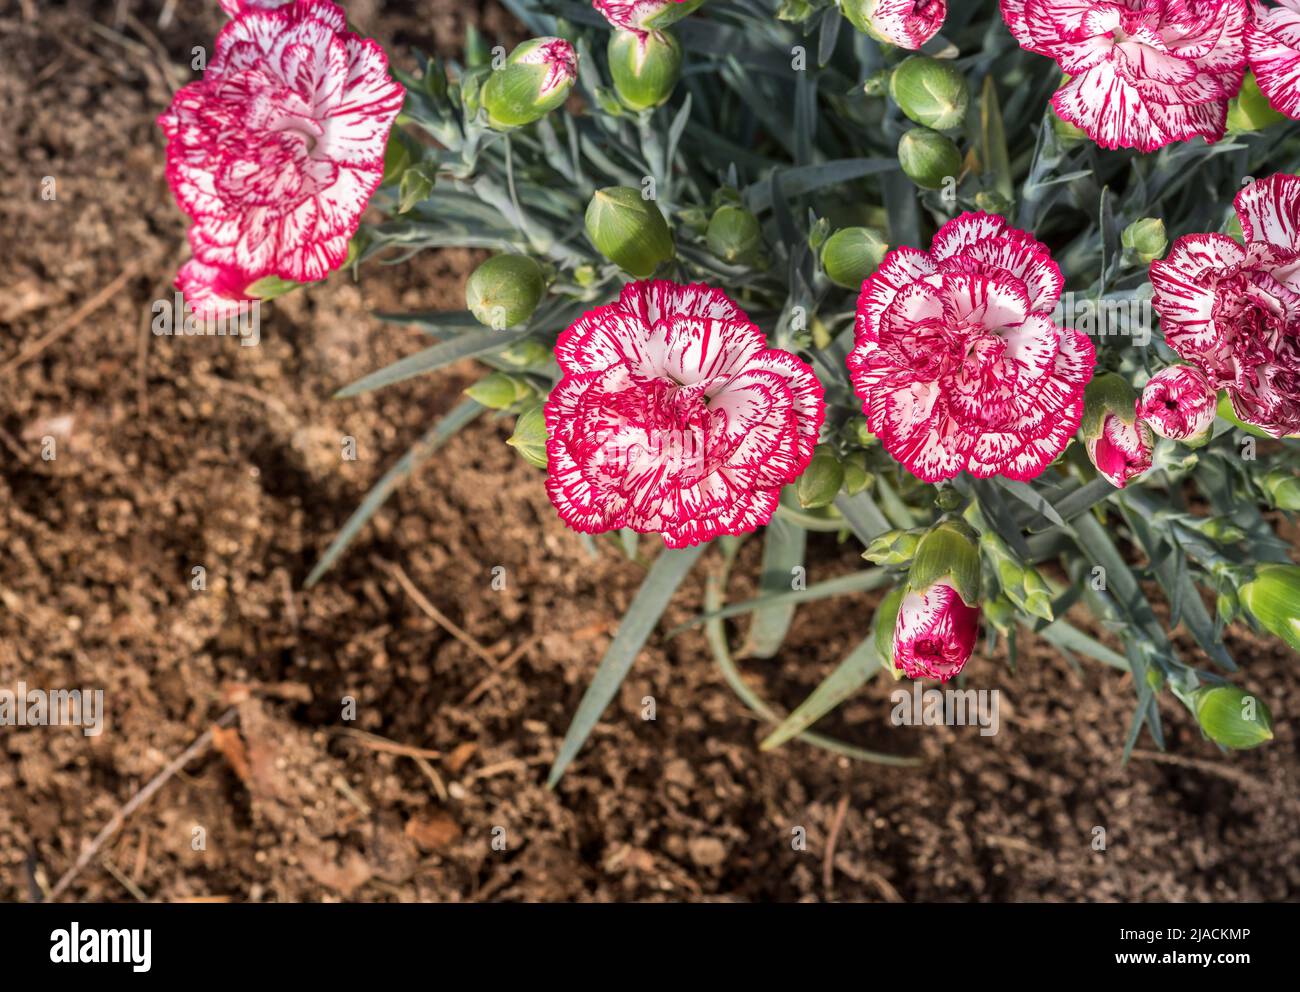 Pink and white dianthus caryophyllus flowers bouquet. Stock Photo